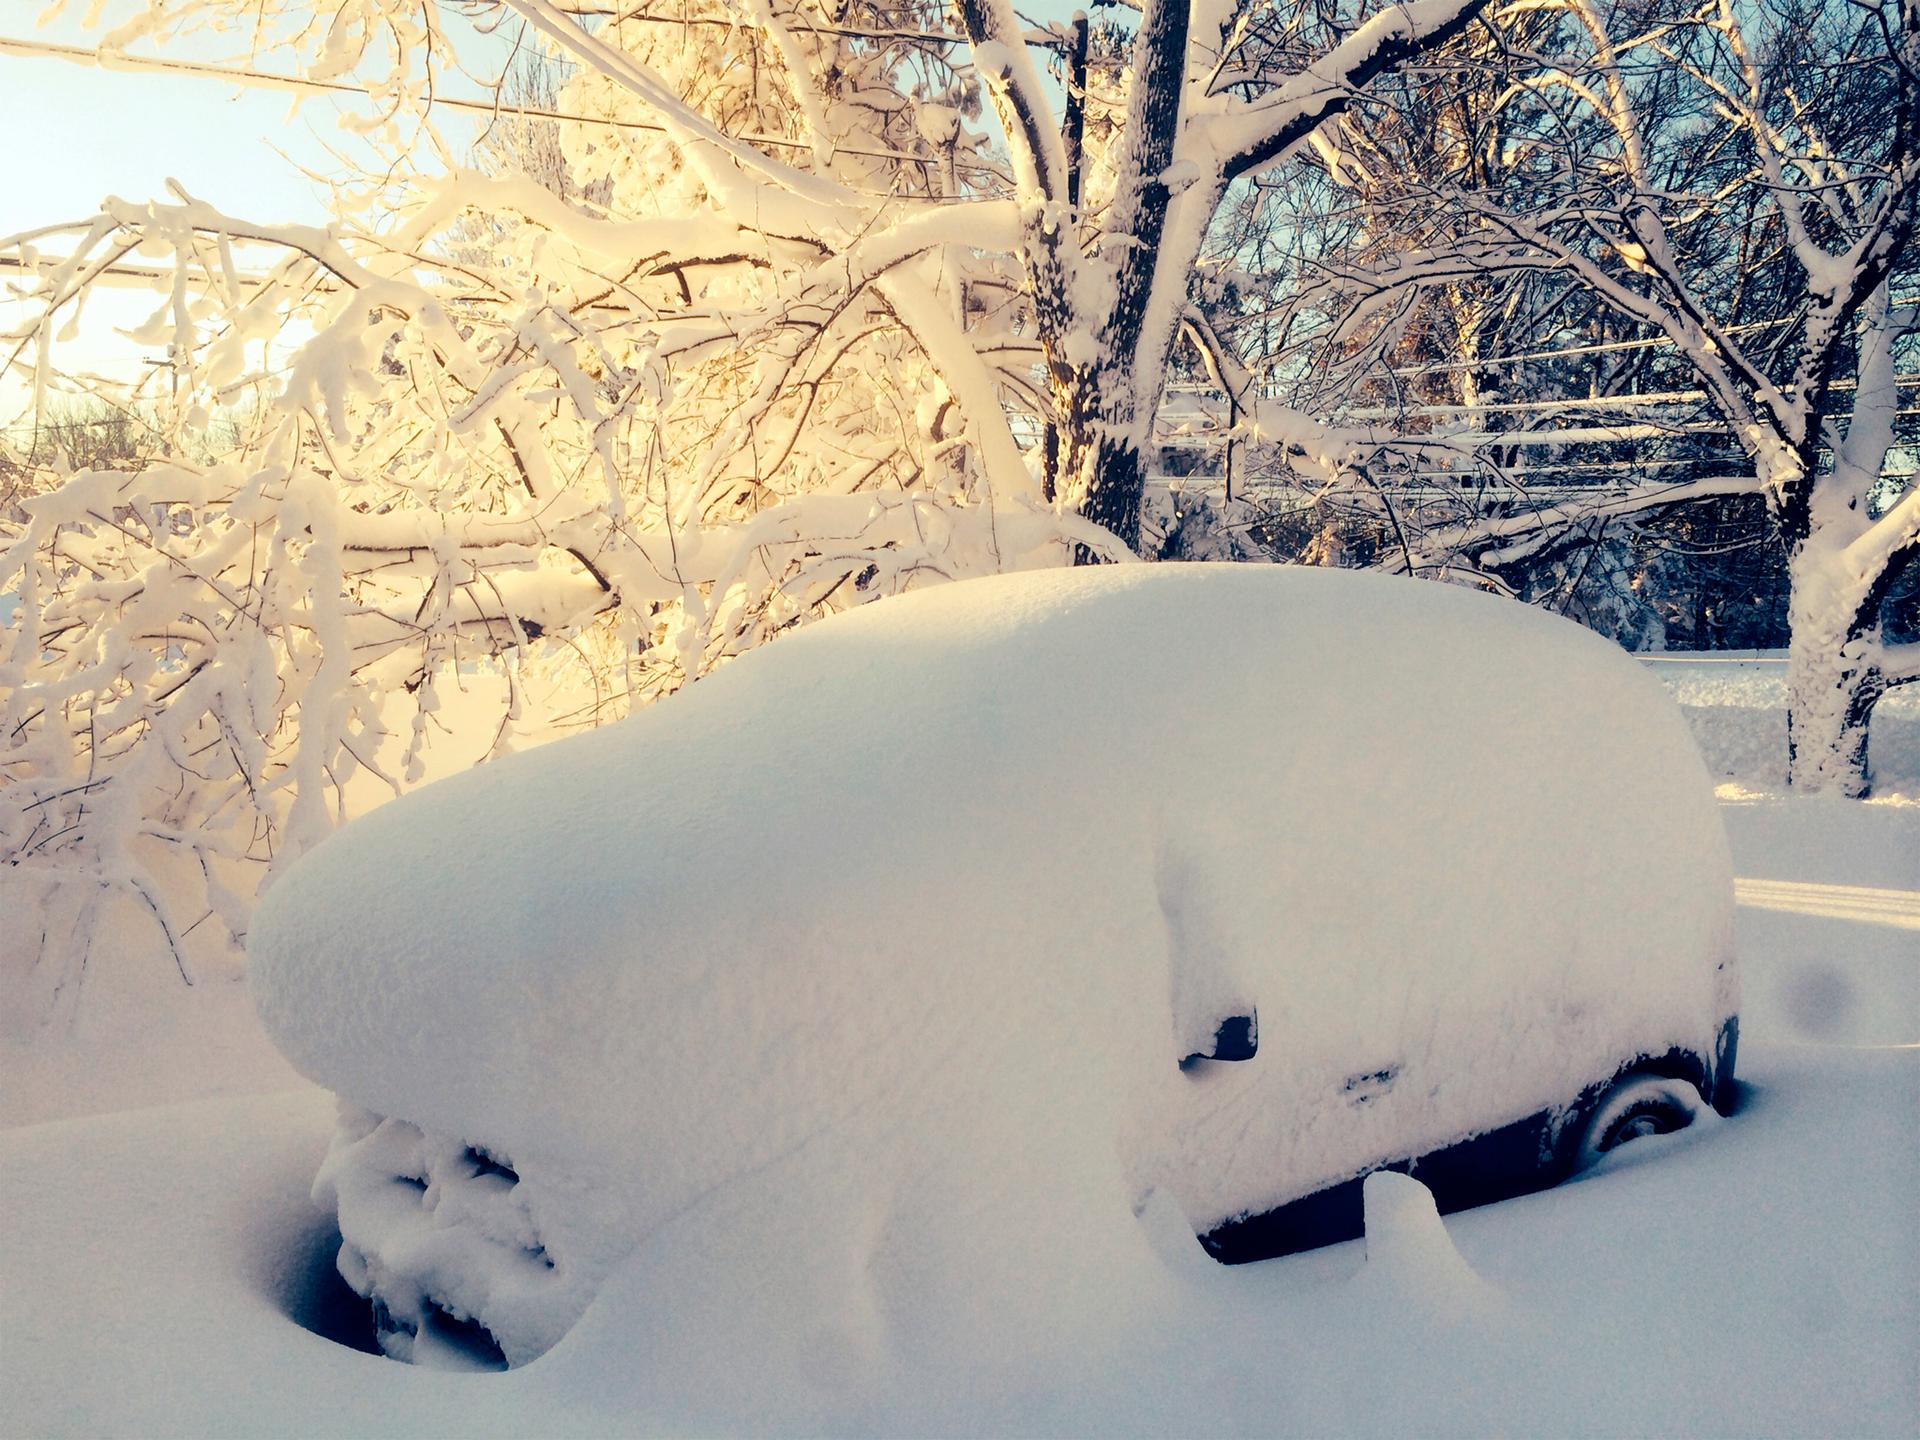 A car is covered in snow in Orchard Park outside of Buffalo, New York, November 19, 2014.